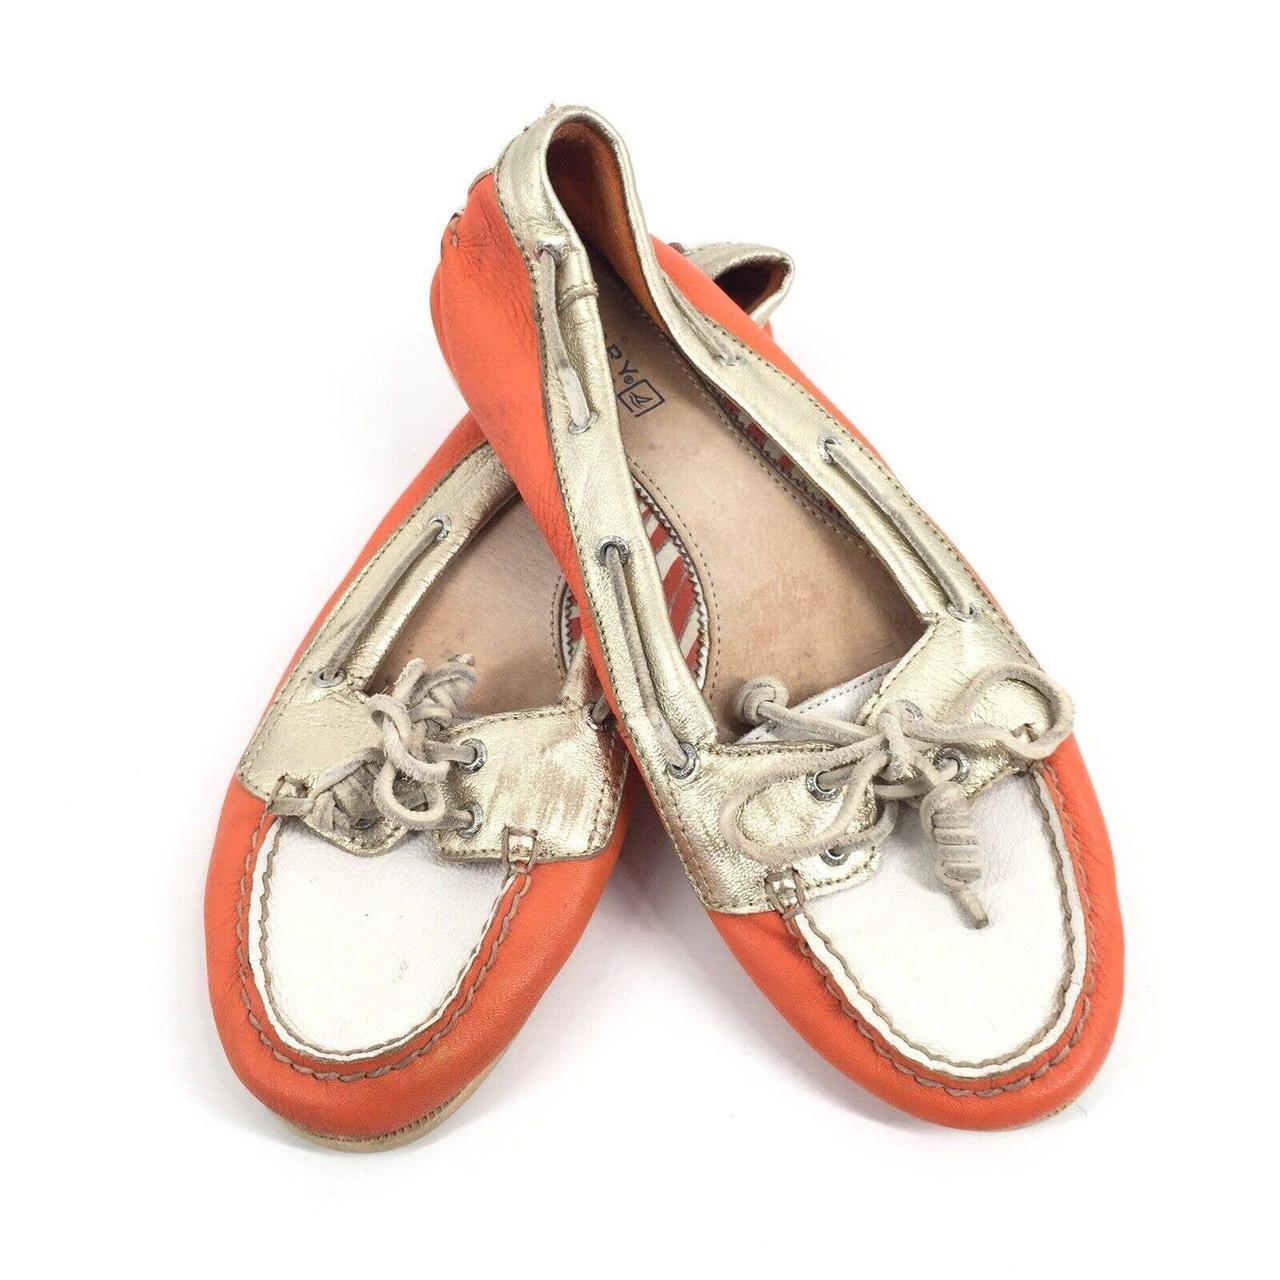 Sperry Women's Orange and White Loafers